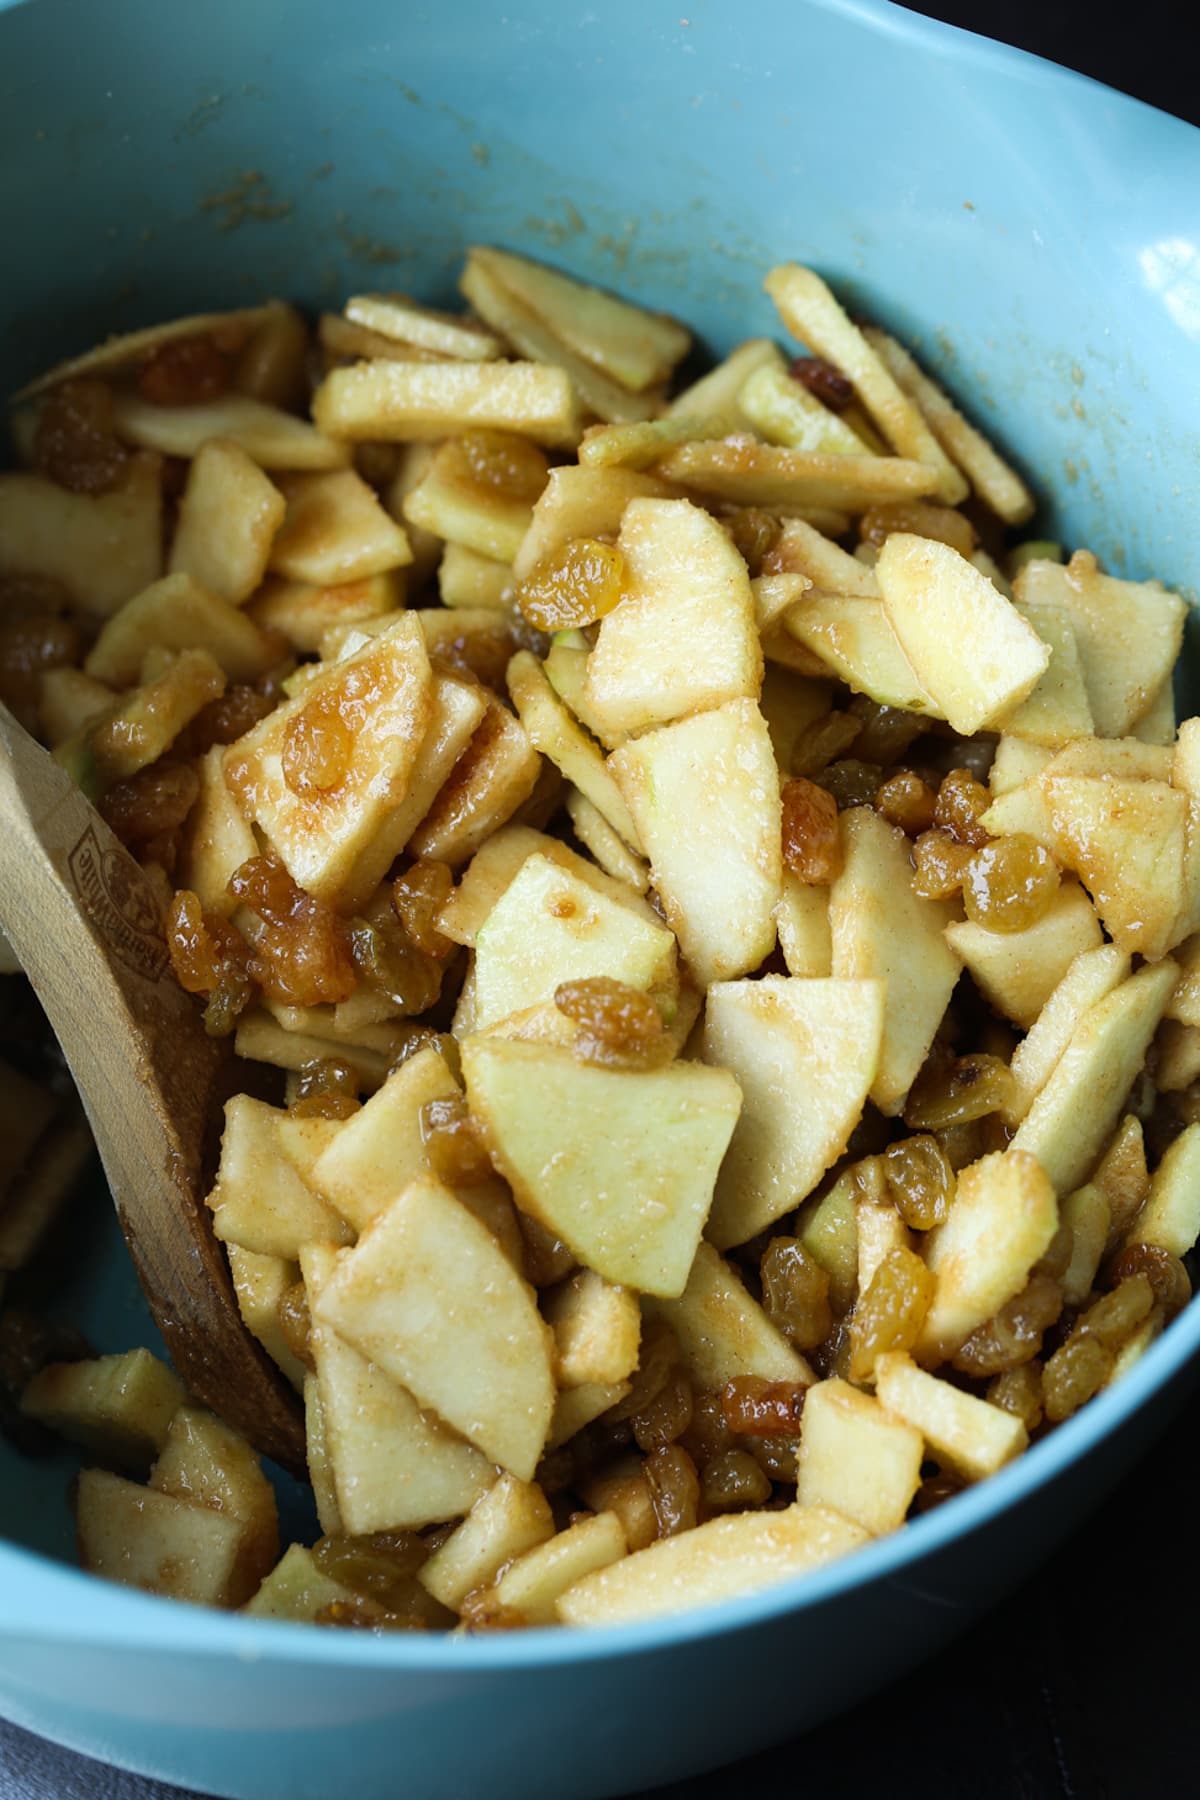 A blue bowl filled with chopped sliced apples coated in cinnamon sugar